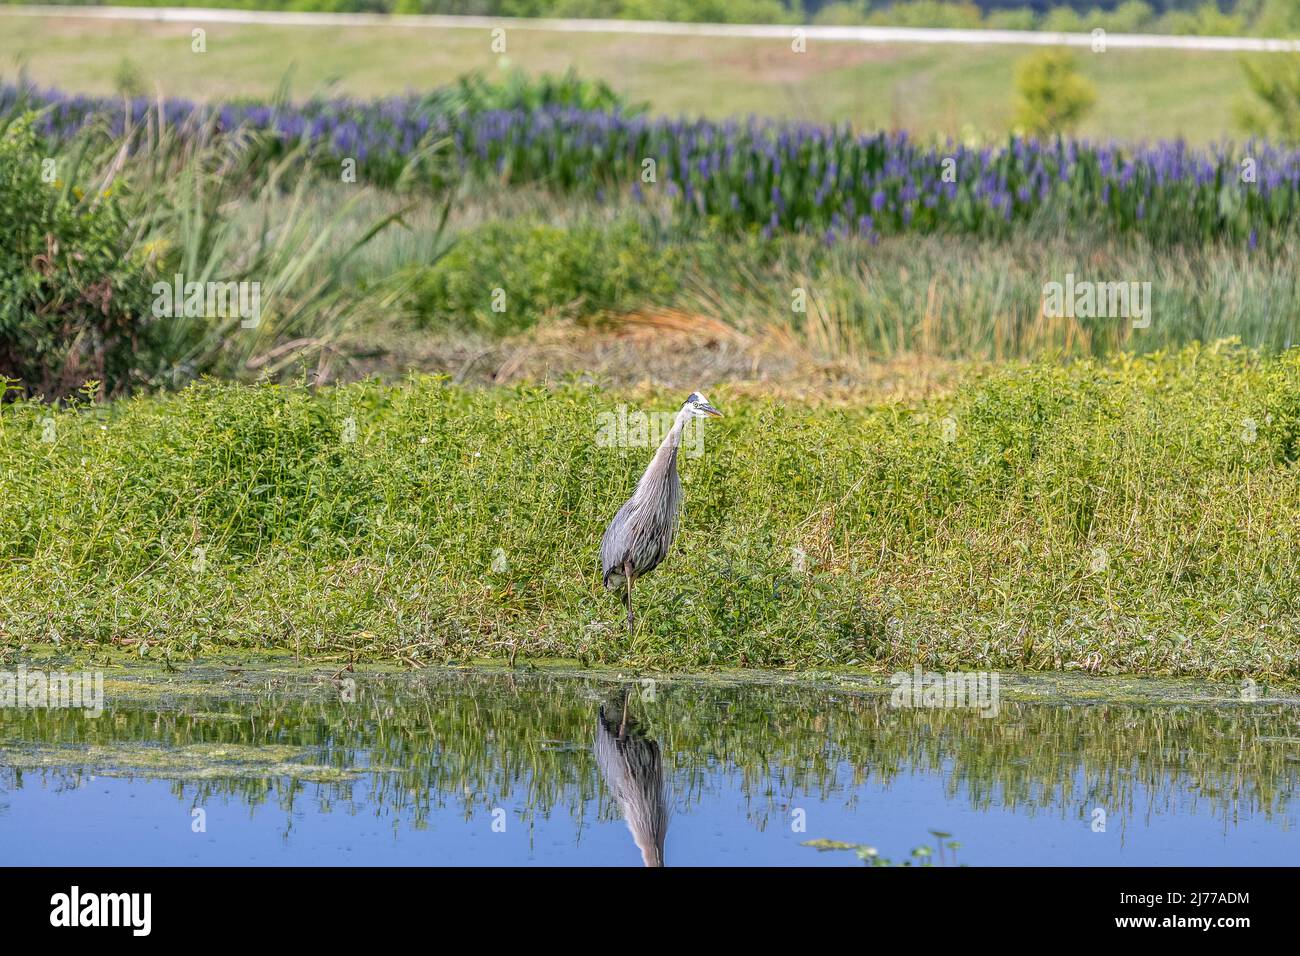 Herons grace the shorelines of the wetland preservation Stock Photo